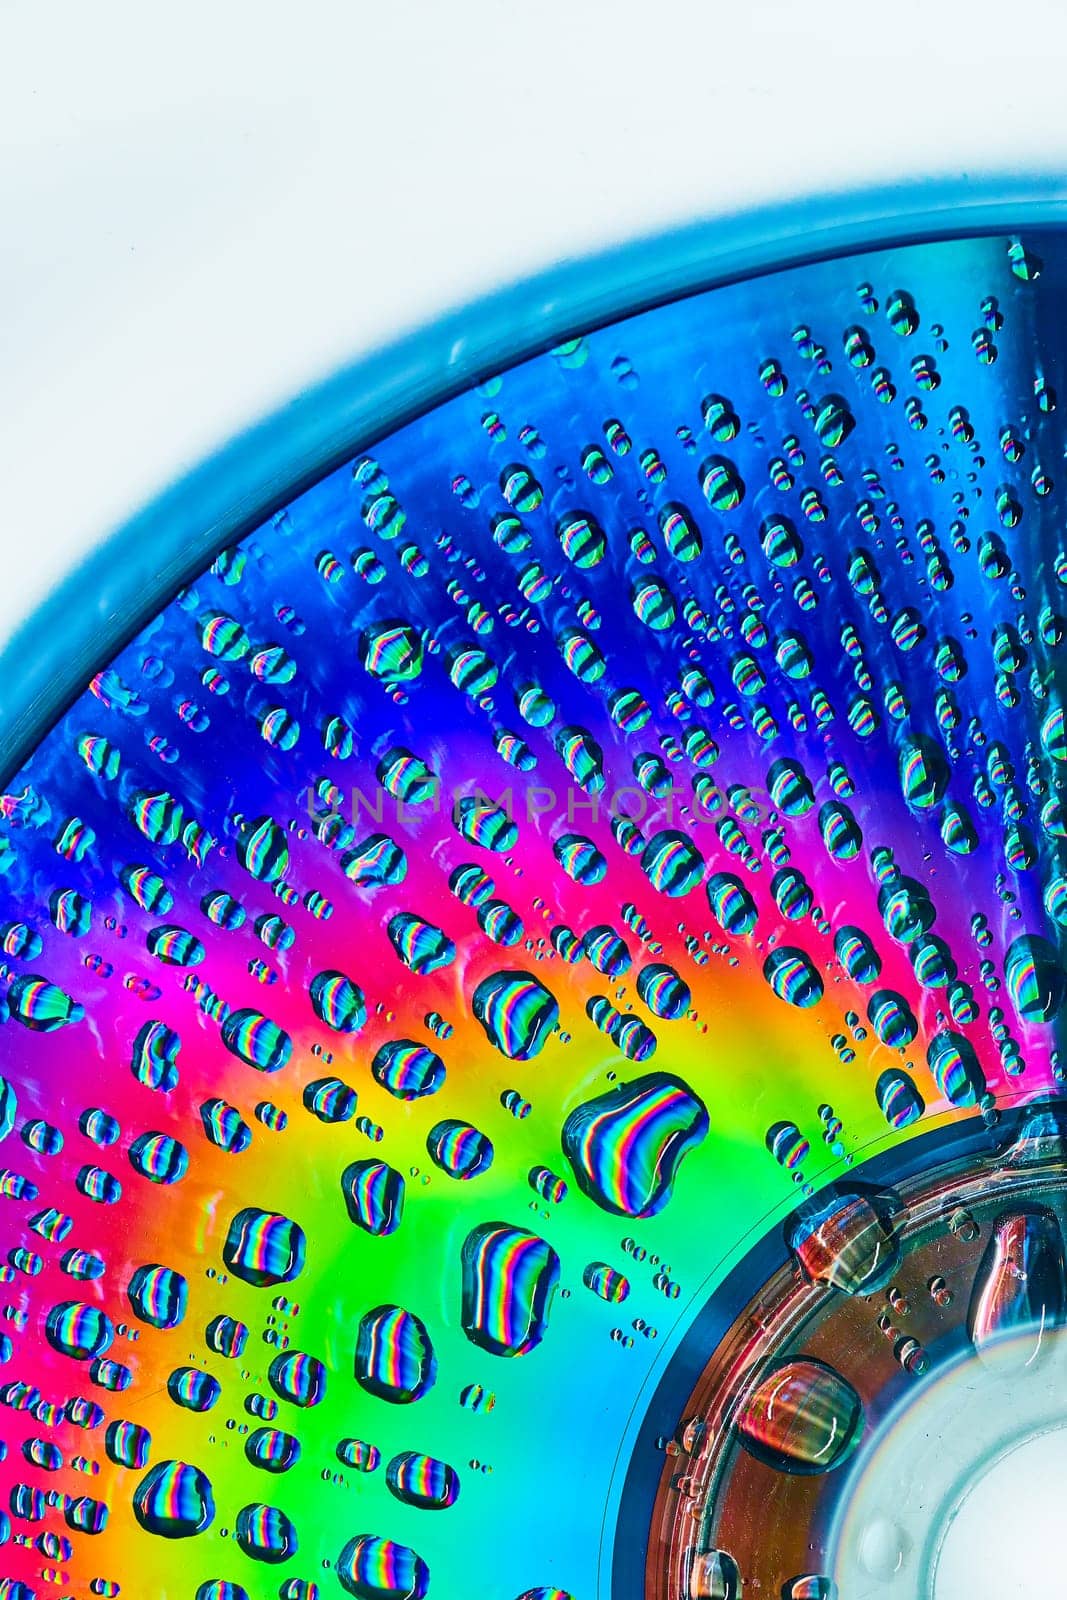 Image of Brilliant burst of rainbow colors on metallic surface with water drops abstract background asset